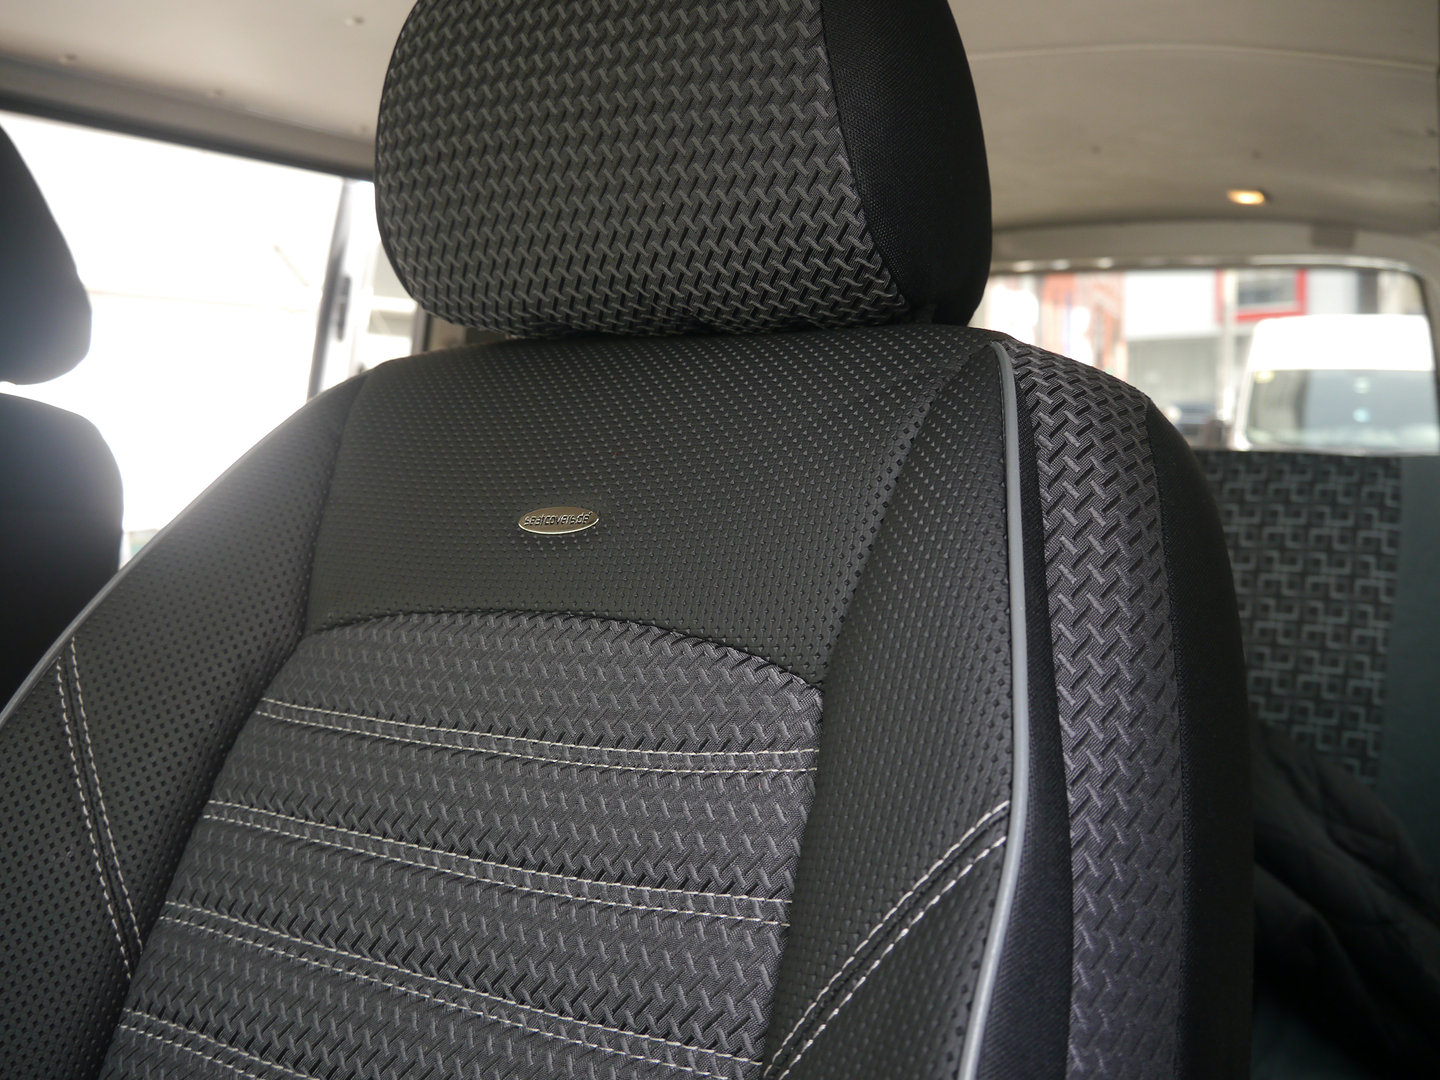 Car seat covers VW T6 Transporter RHD for drivers seat and bench